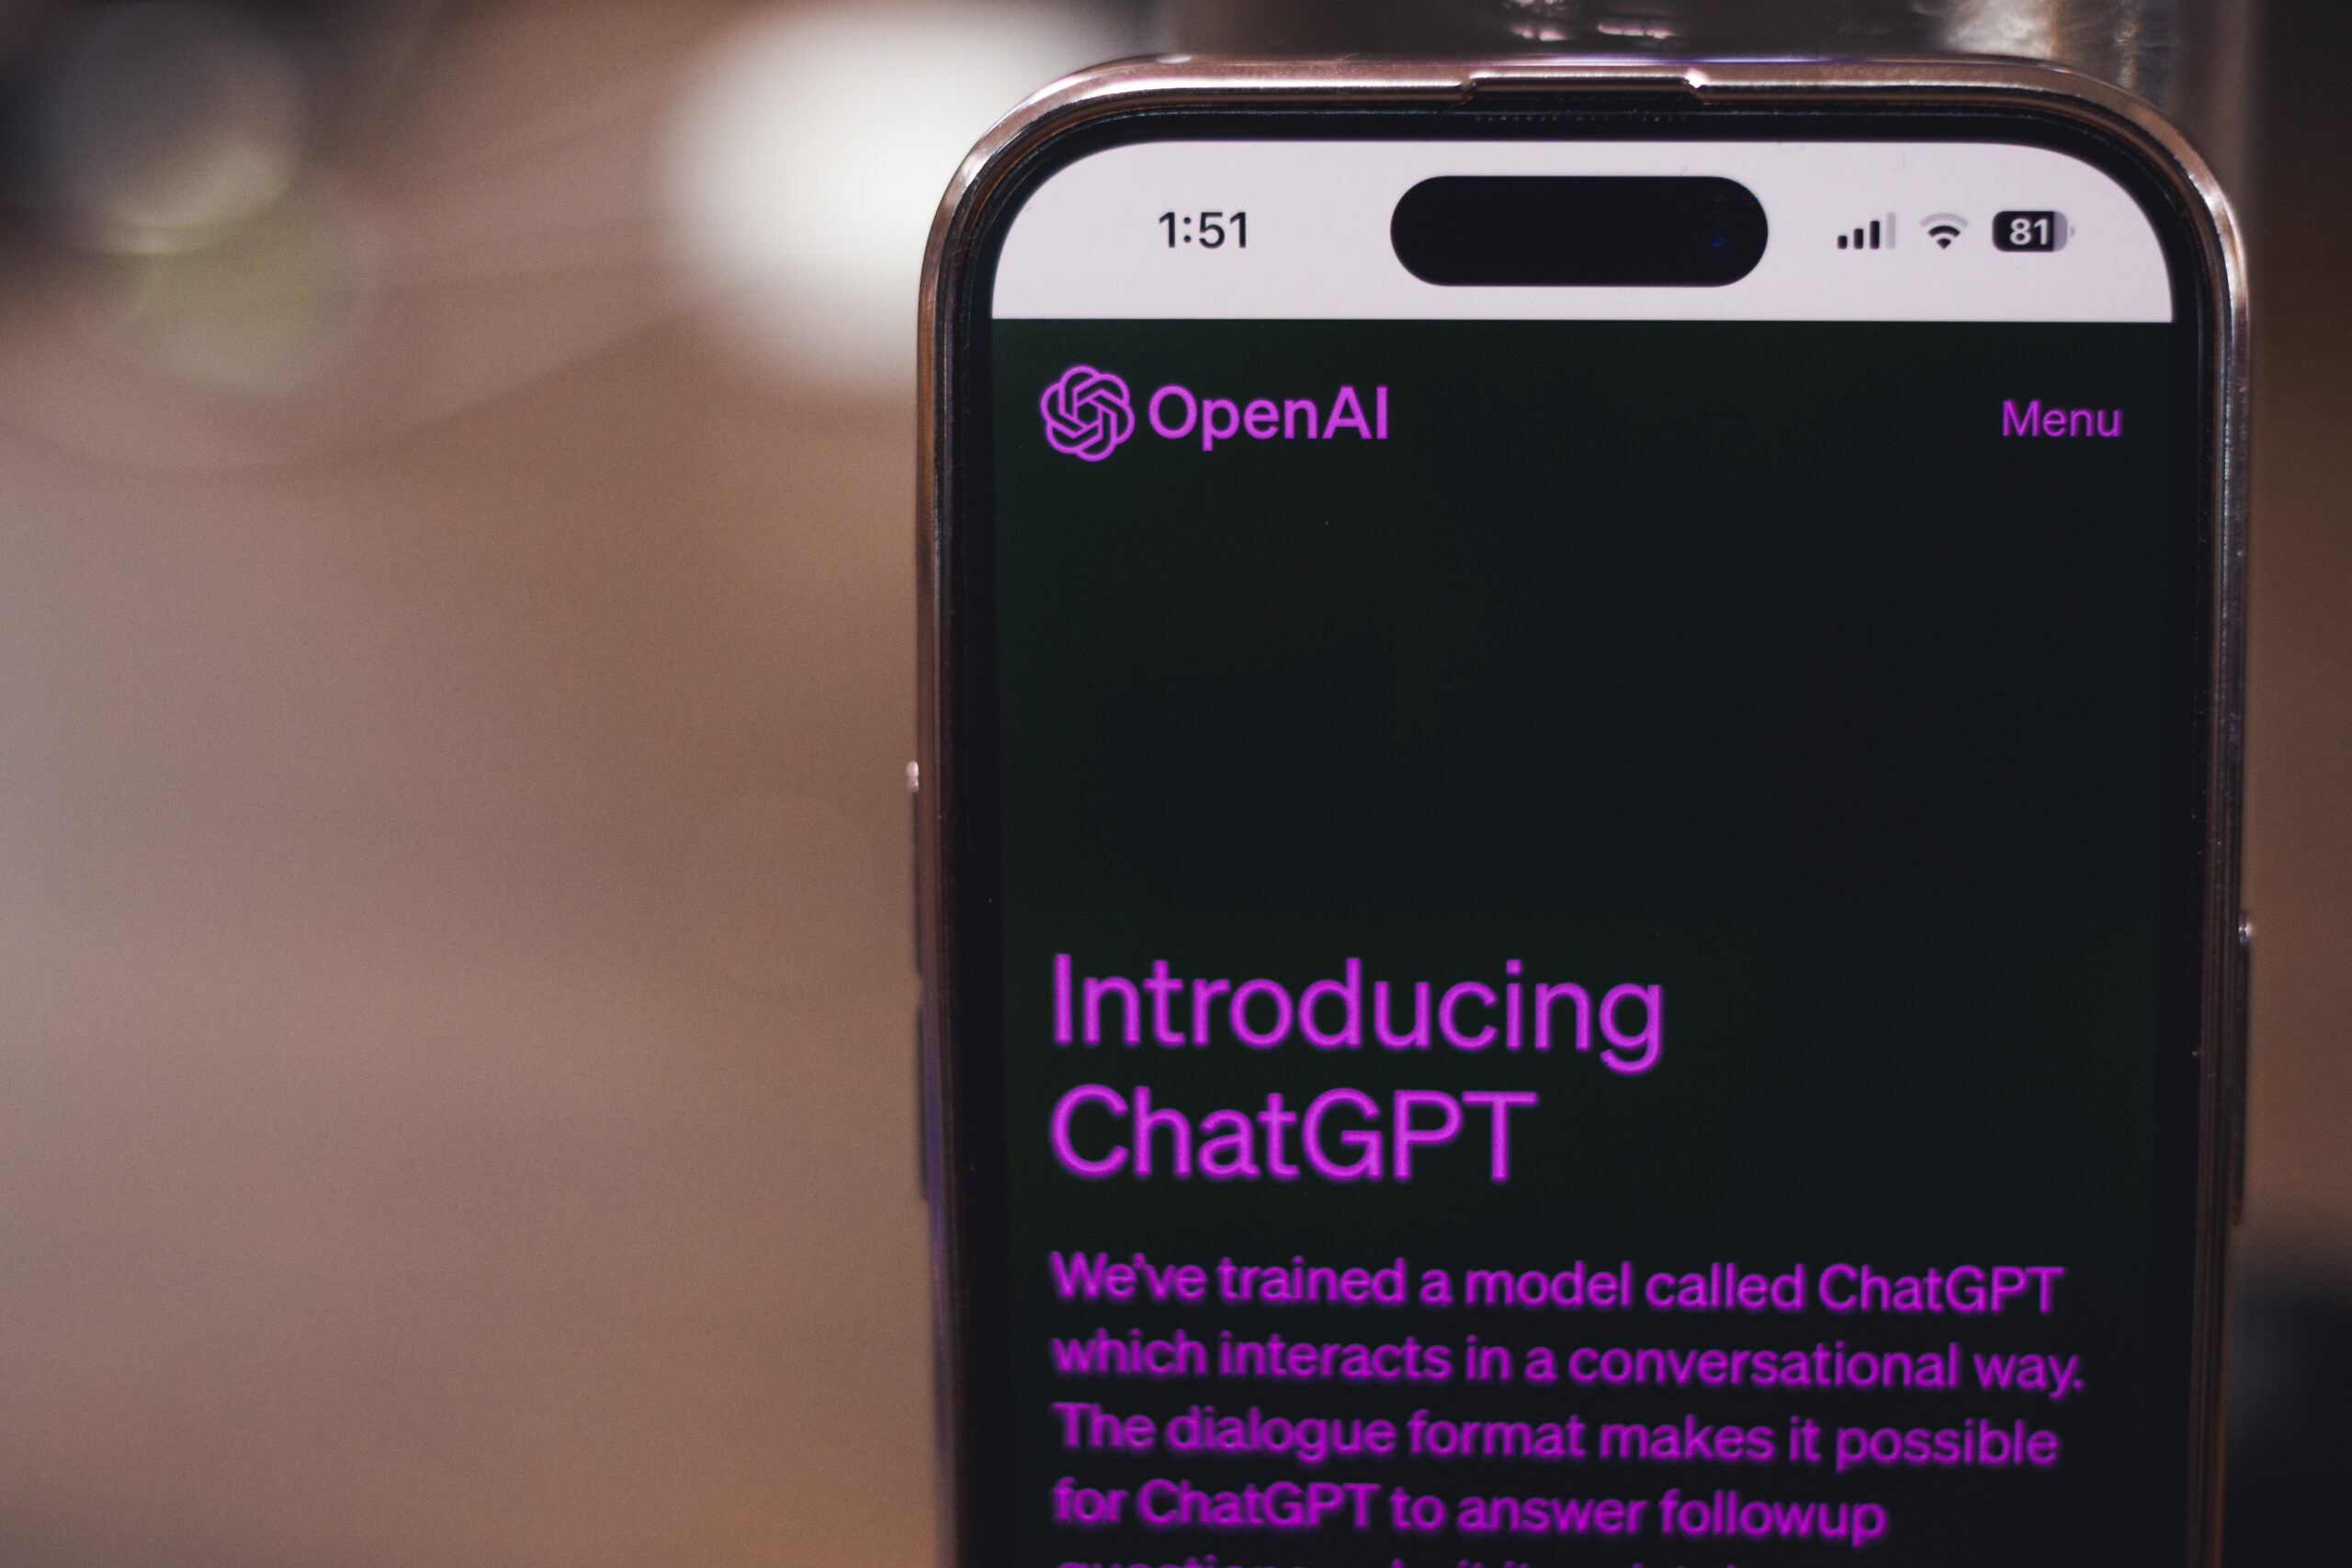 "Introducing ChatGPT" picture